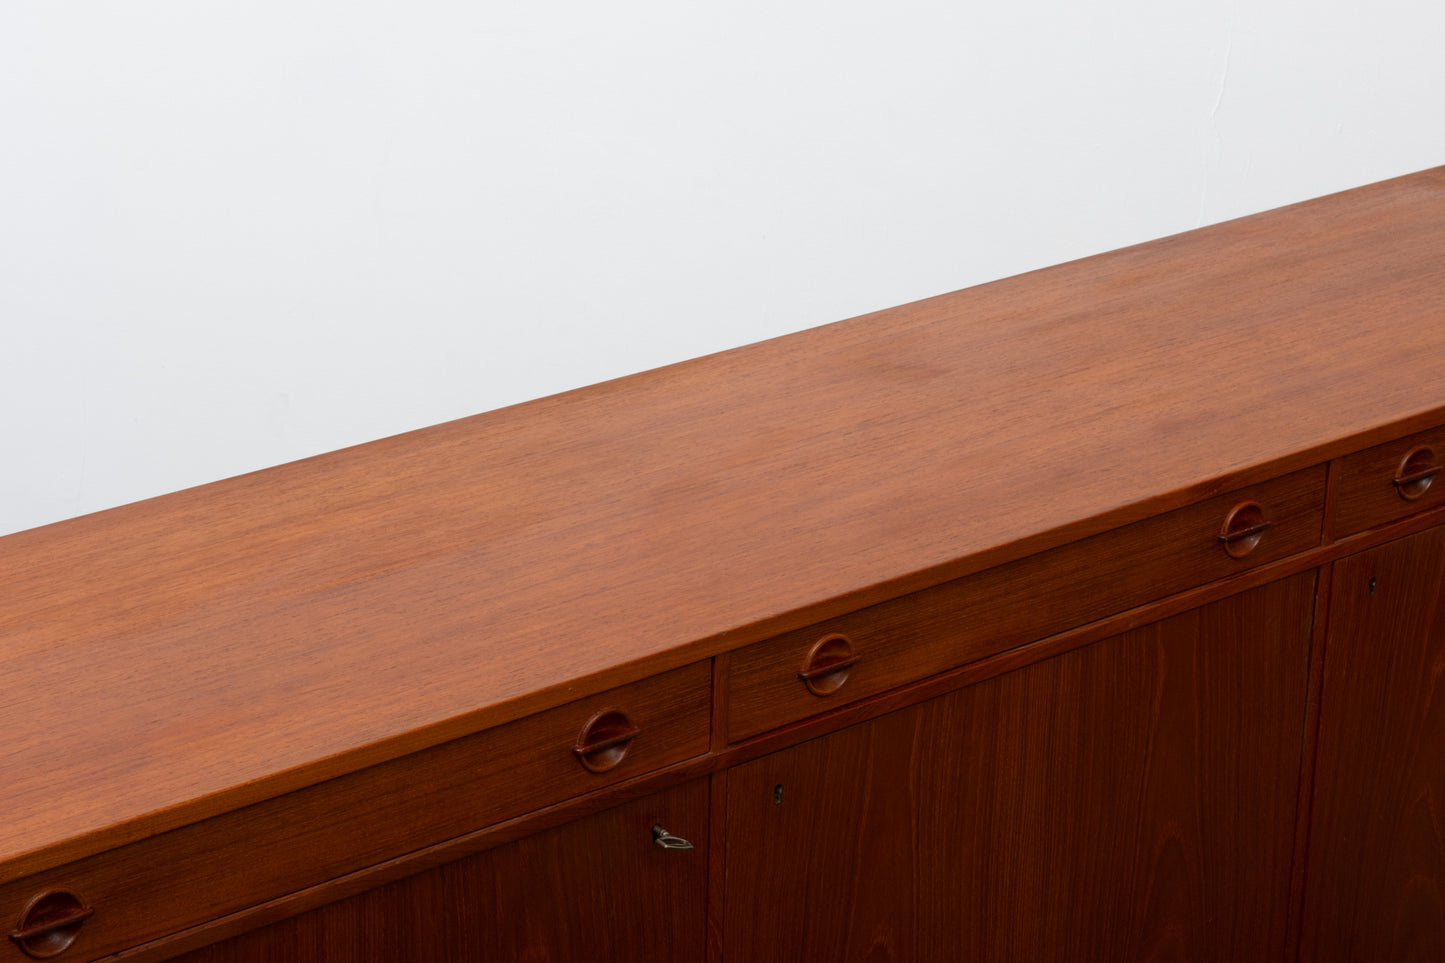 1960s teak sideboard by Tage Olofsson